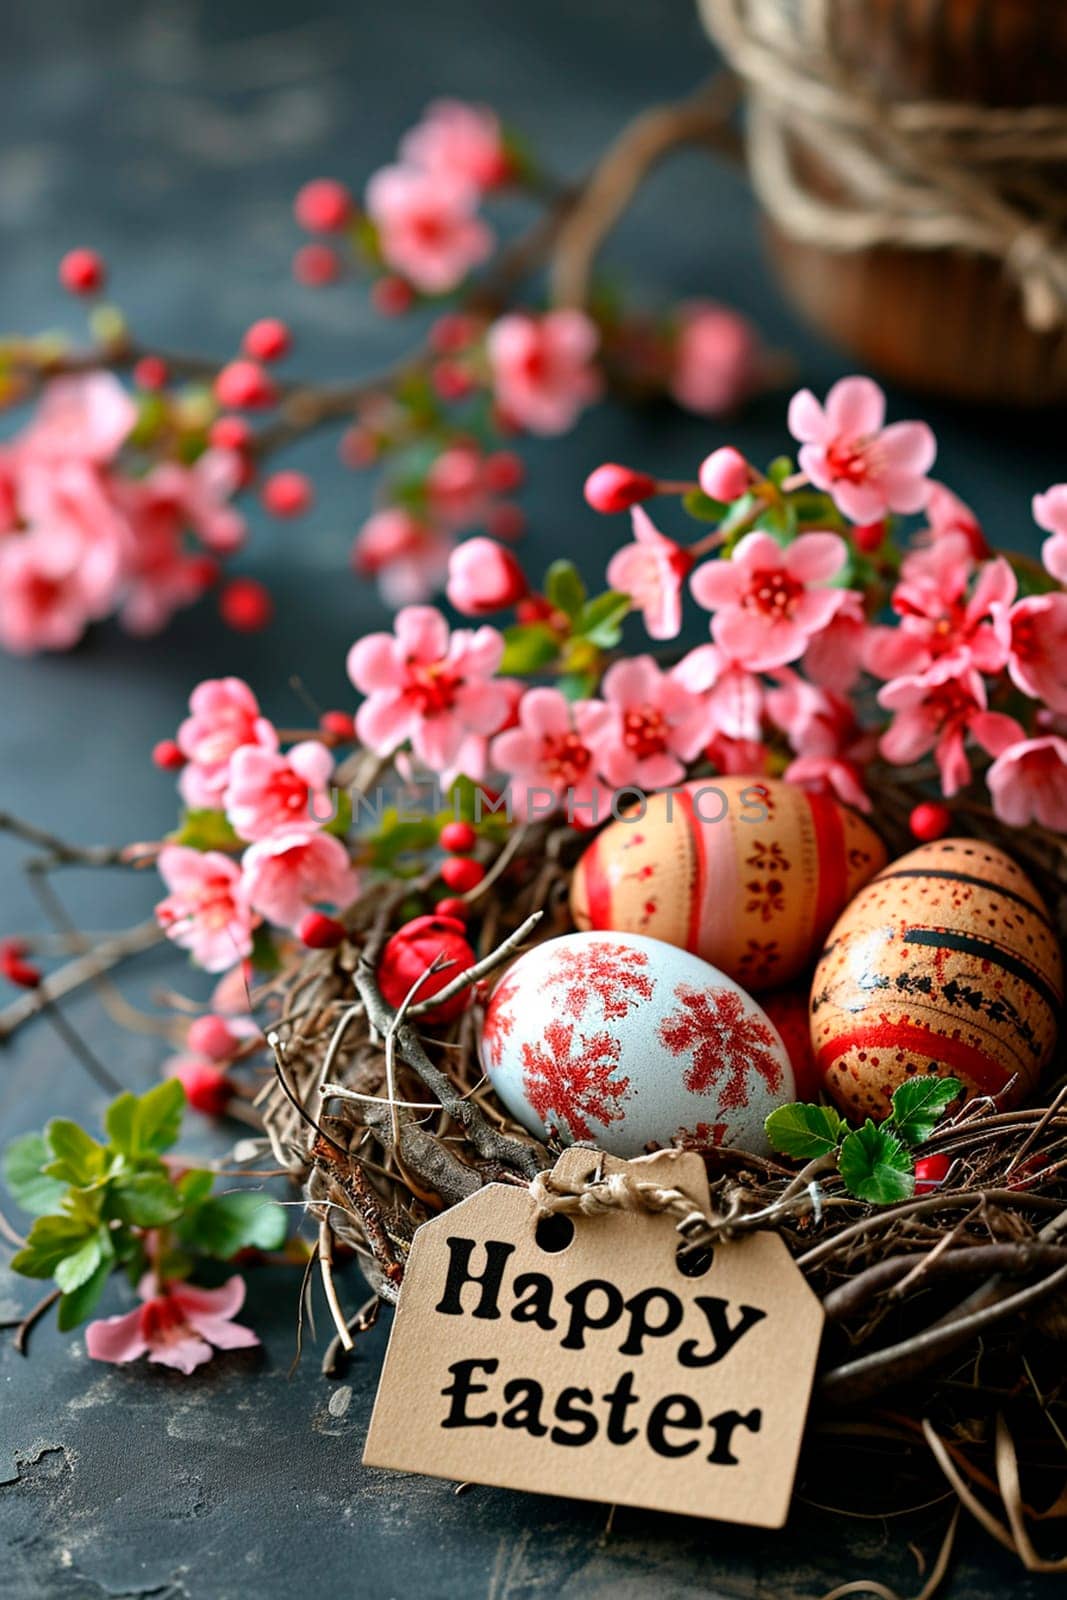 Happy Easter card and eggs. Selective focus. Nature.